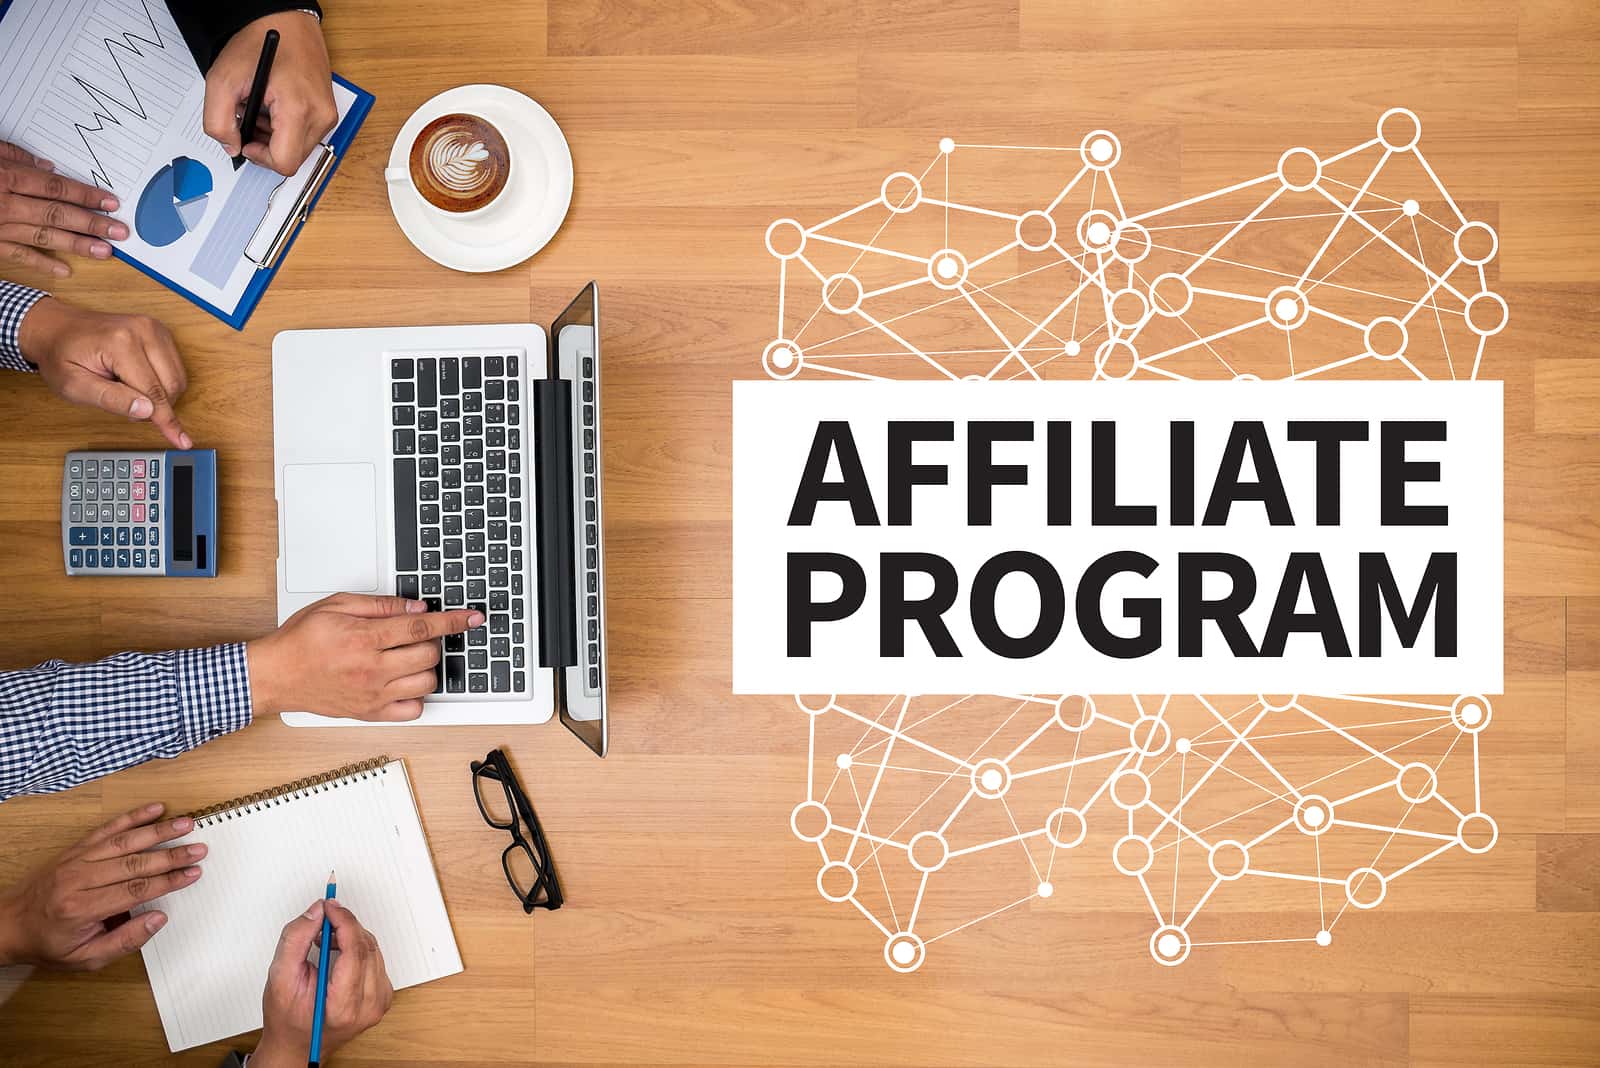 Do? what affiliate program does the alert